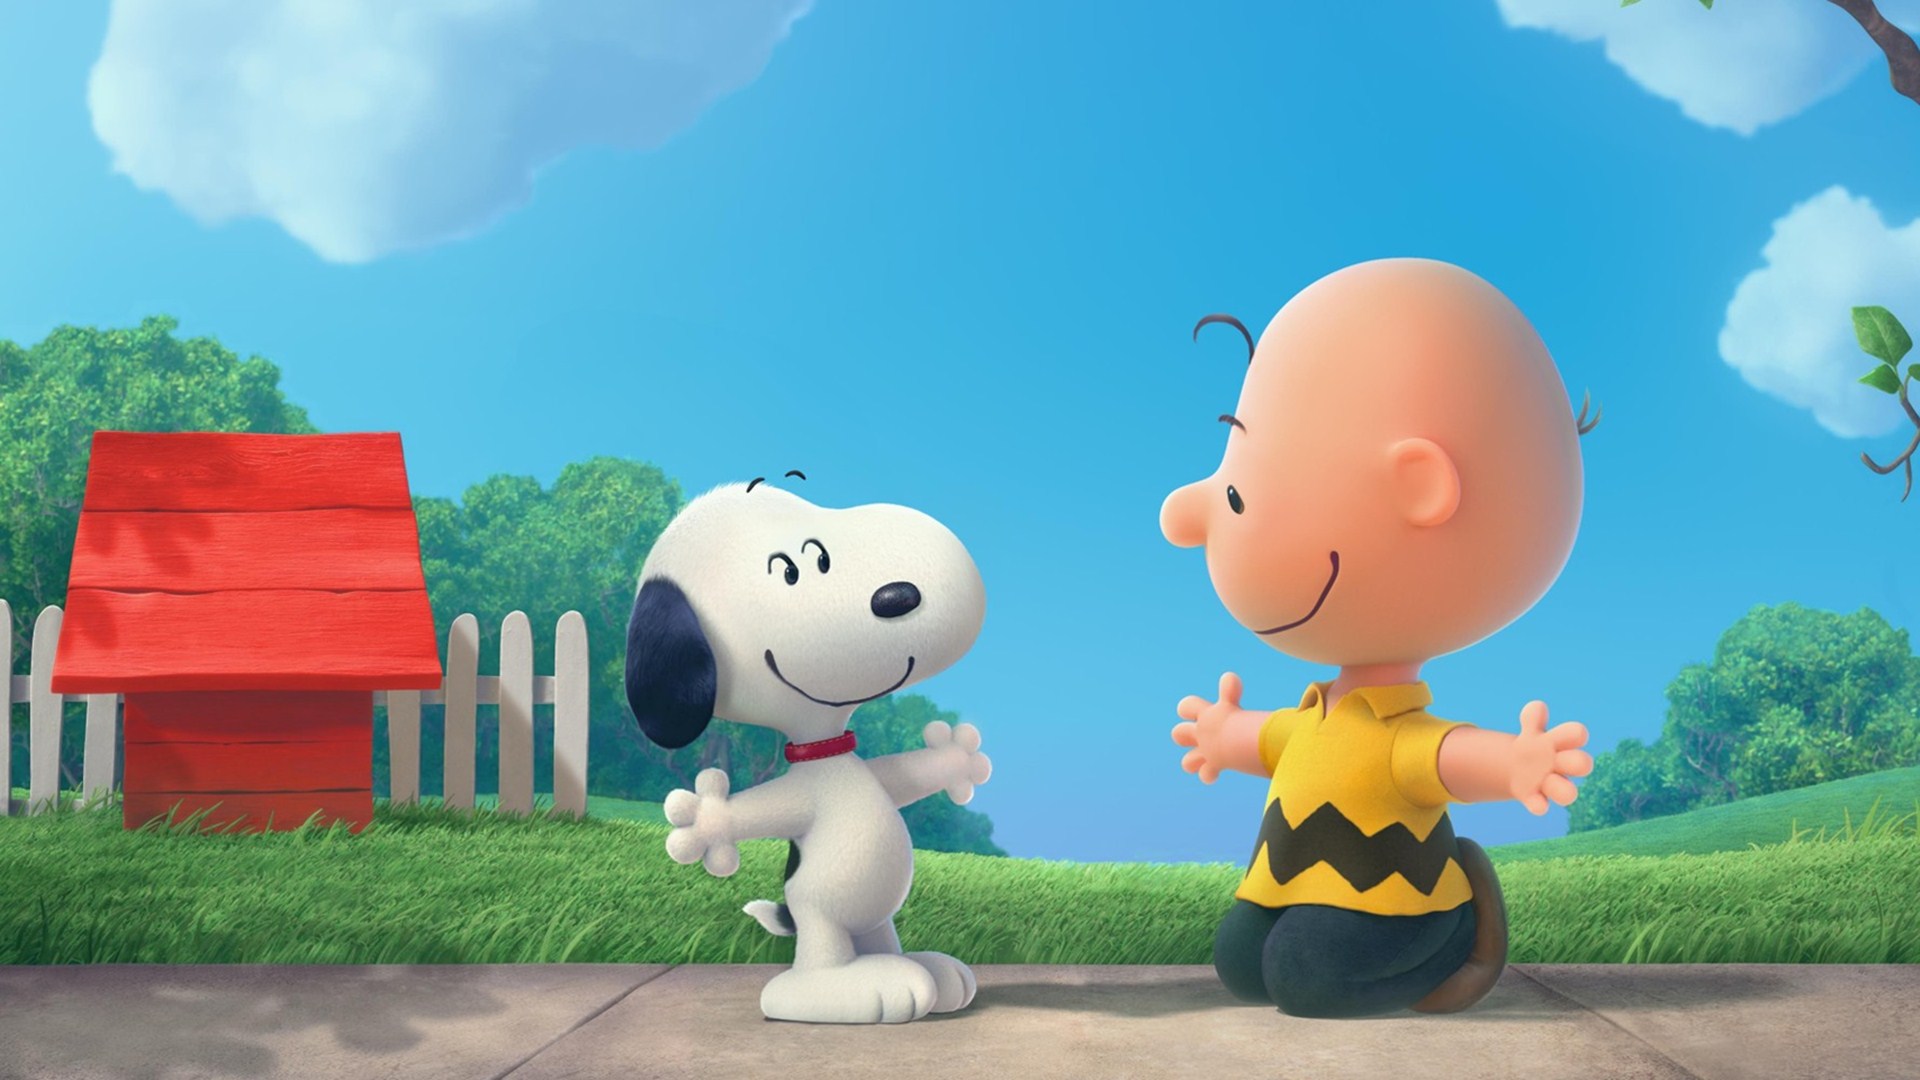 Download Snoopy And Charlie Brown The Peanuts Cartoon HD Wallpaper